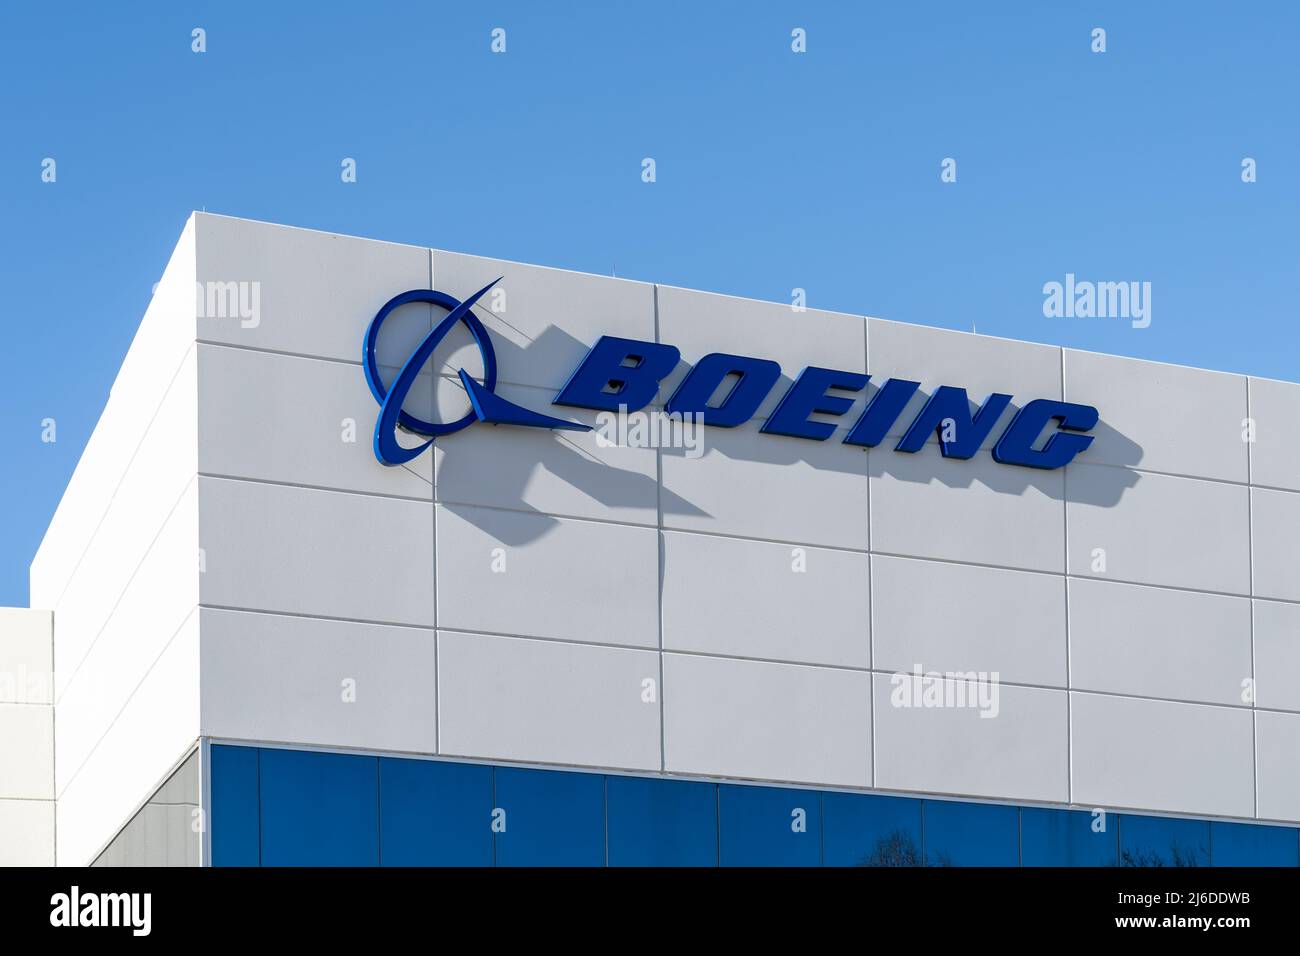 Irving, Texas, USA - March 20, 2022: Closeup of Boeing sign on the building in Irving, Texas, USA. Stock Photo